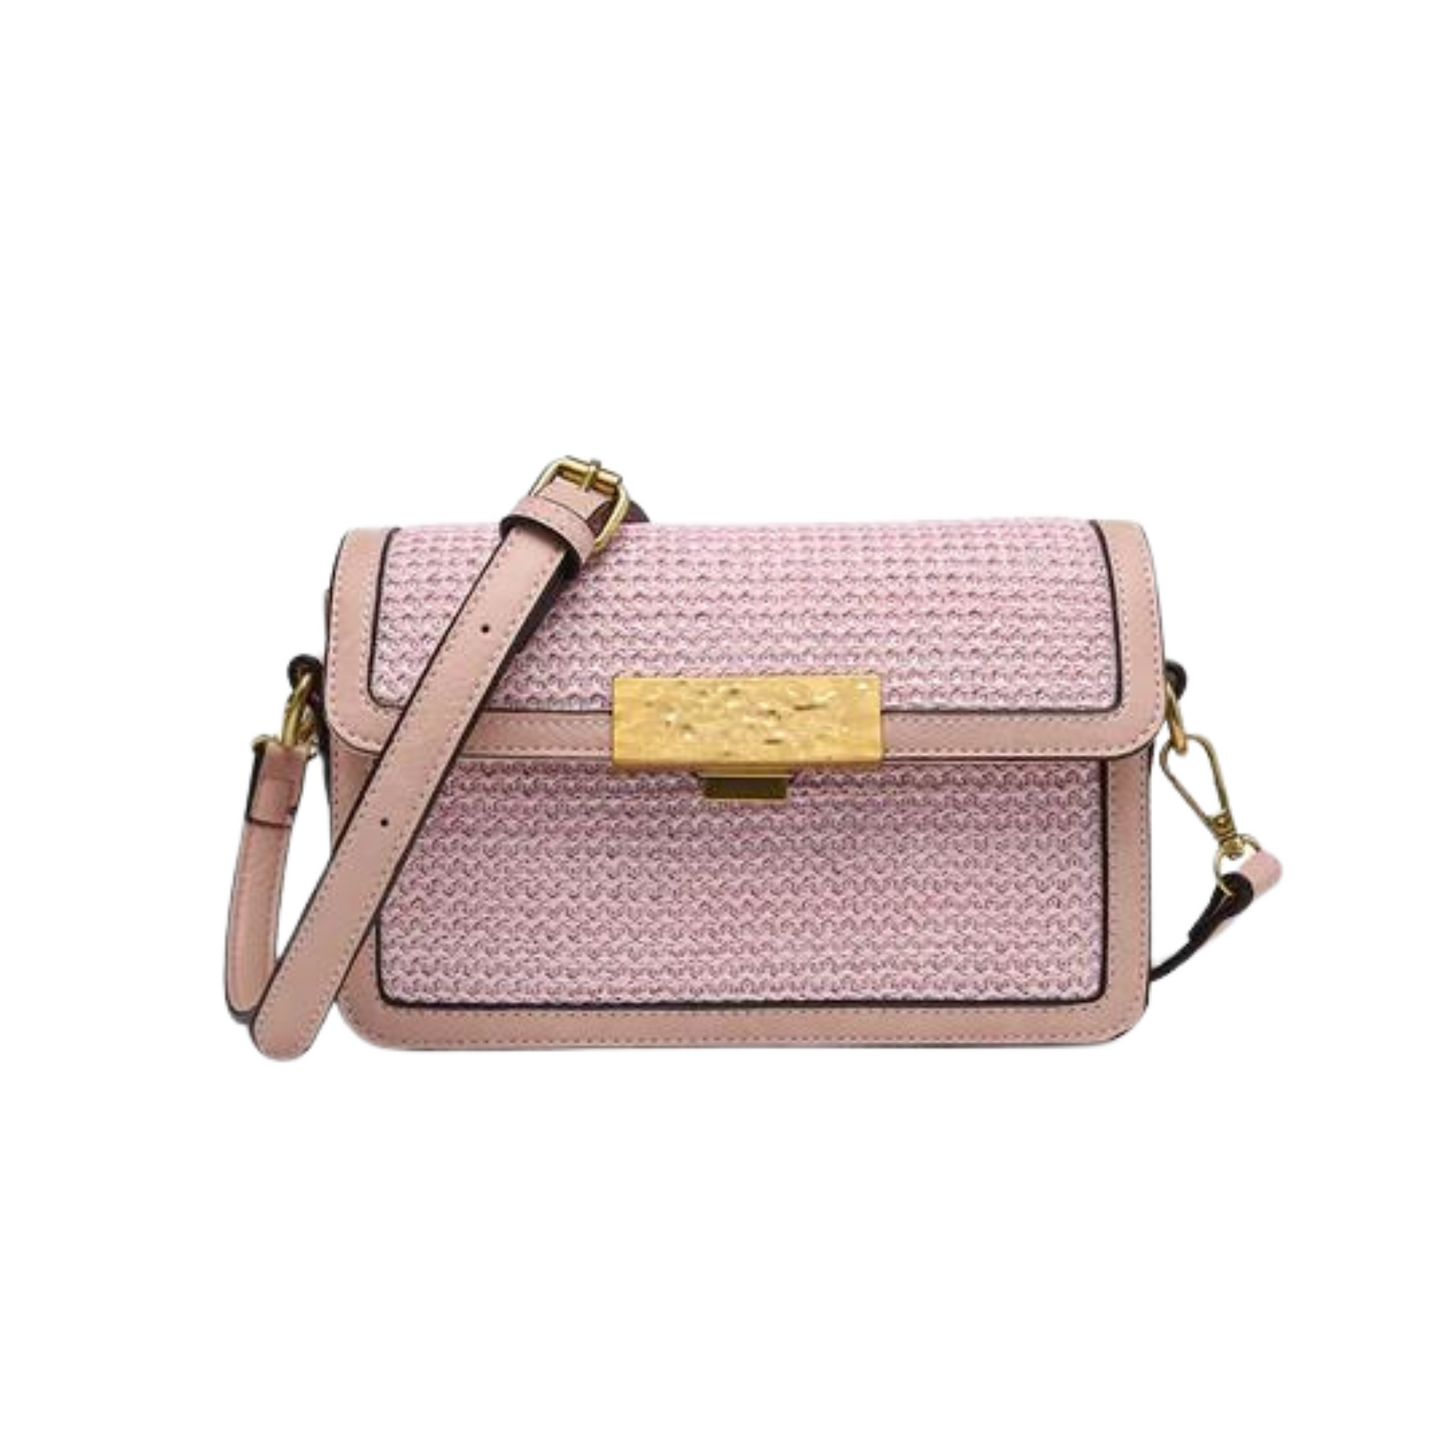 This Straw Crossbody with Lock is the perfect everyday accessory. Its small size keeps your essentials close and secure, while still maintaining a sophisticated and fashionable appearance. The purse comes in pink and cream, allowing you to choose a color that fits your style.